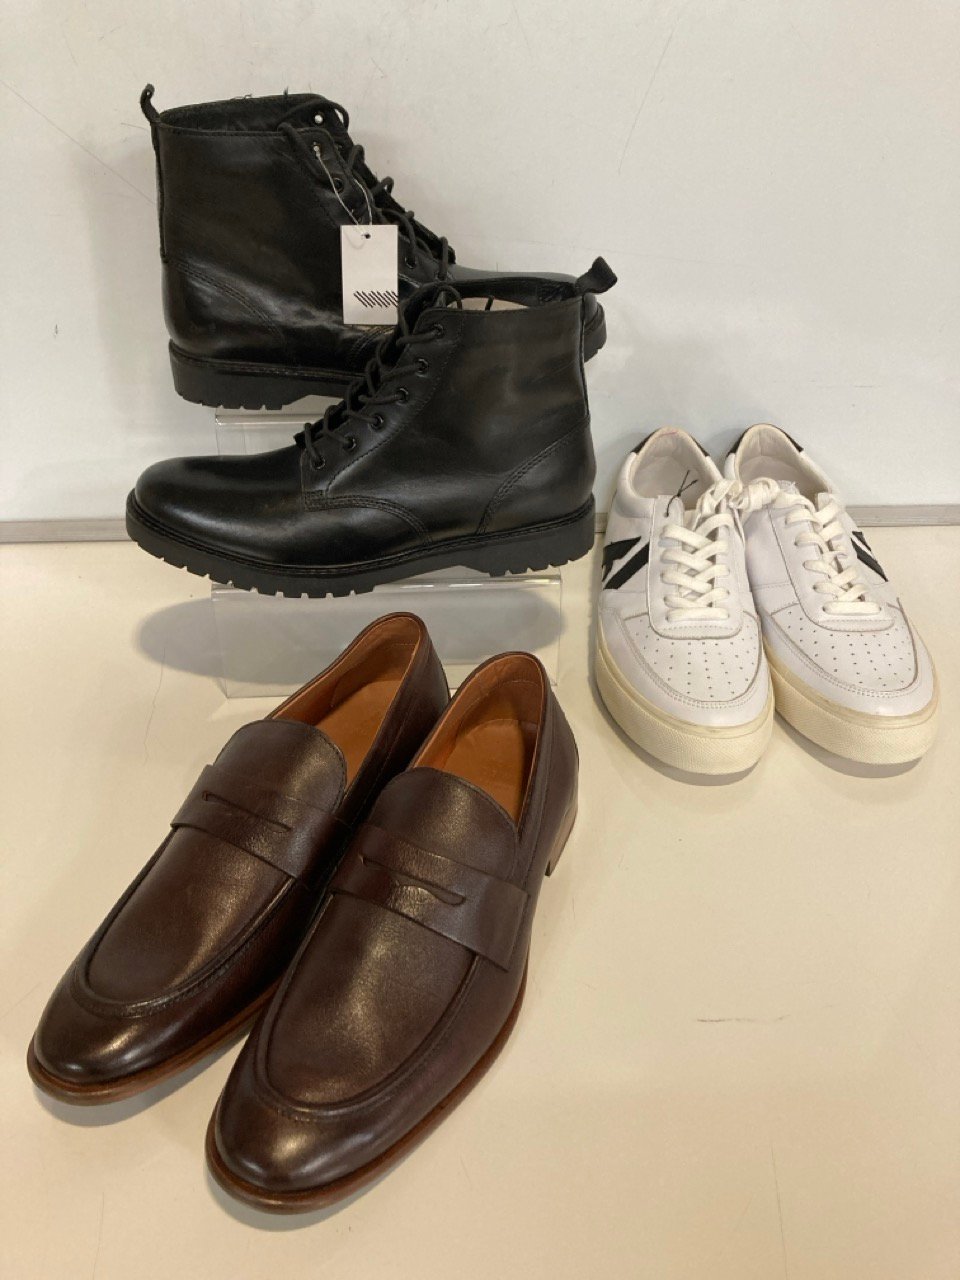 3 X PAIRS OF JOHN LEWIS SHOES TO INCLUDE A PAIR OF PENNY LOAFERS, BROWN, SIZE 8